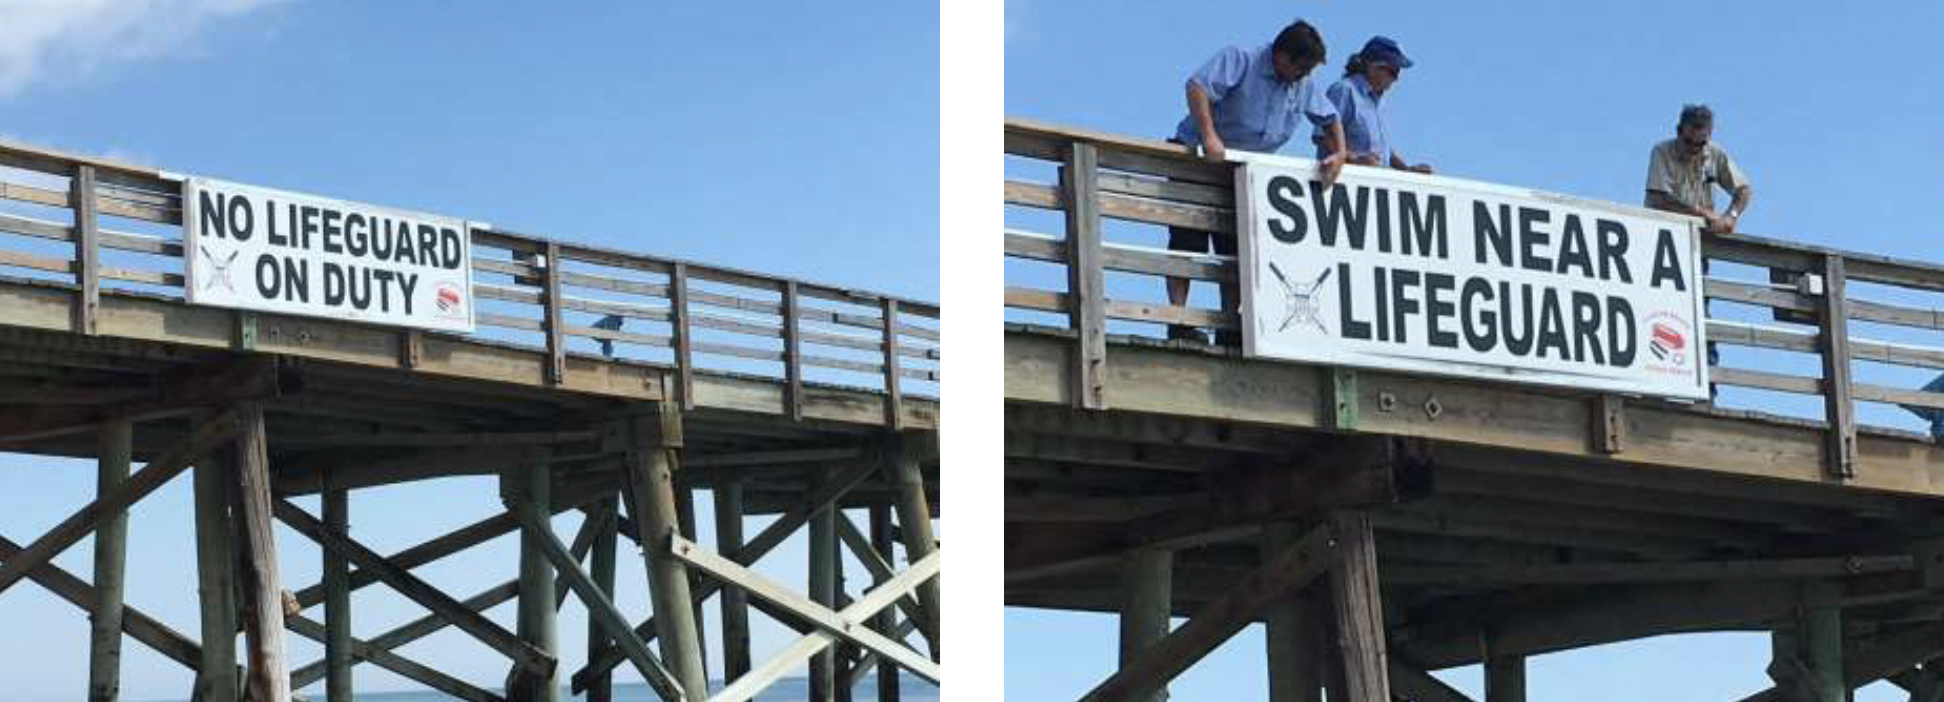 A sign on the pier can be flipped to tell people to swim near a lifeguard, or to warn that there's no lifeguard on duty. Photo courtesy of the city of Flagler Beach